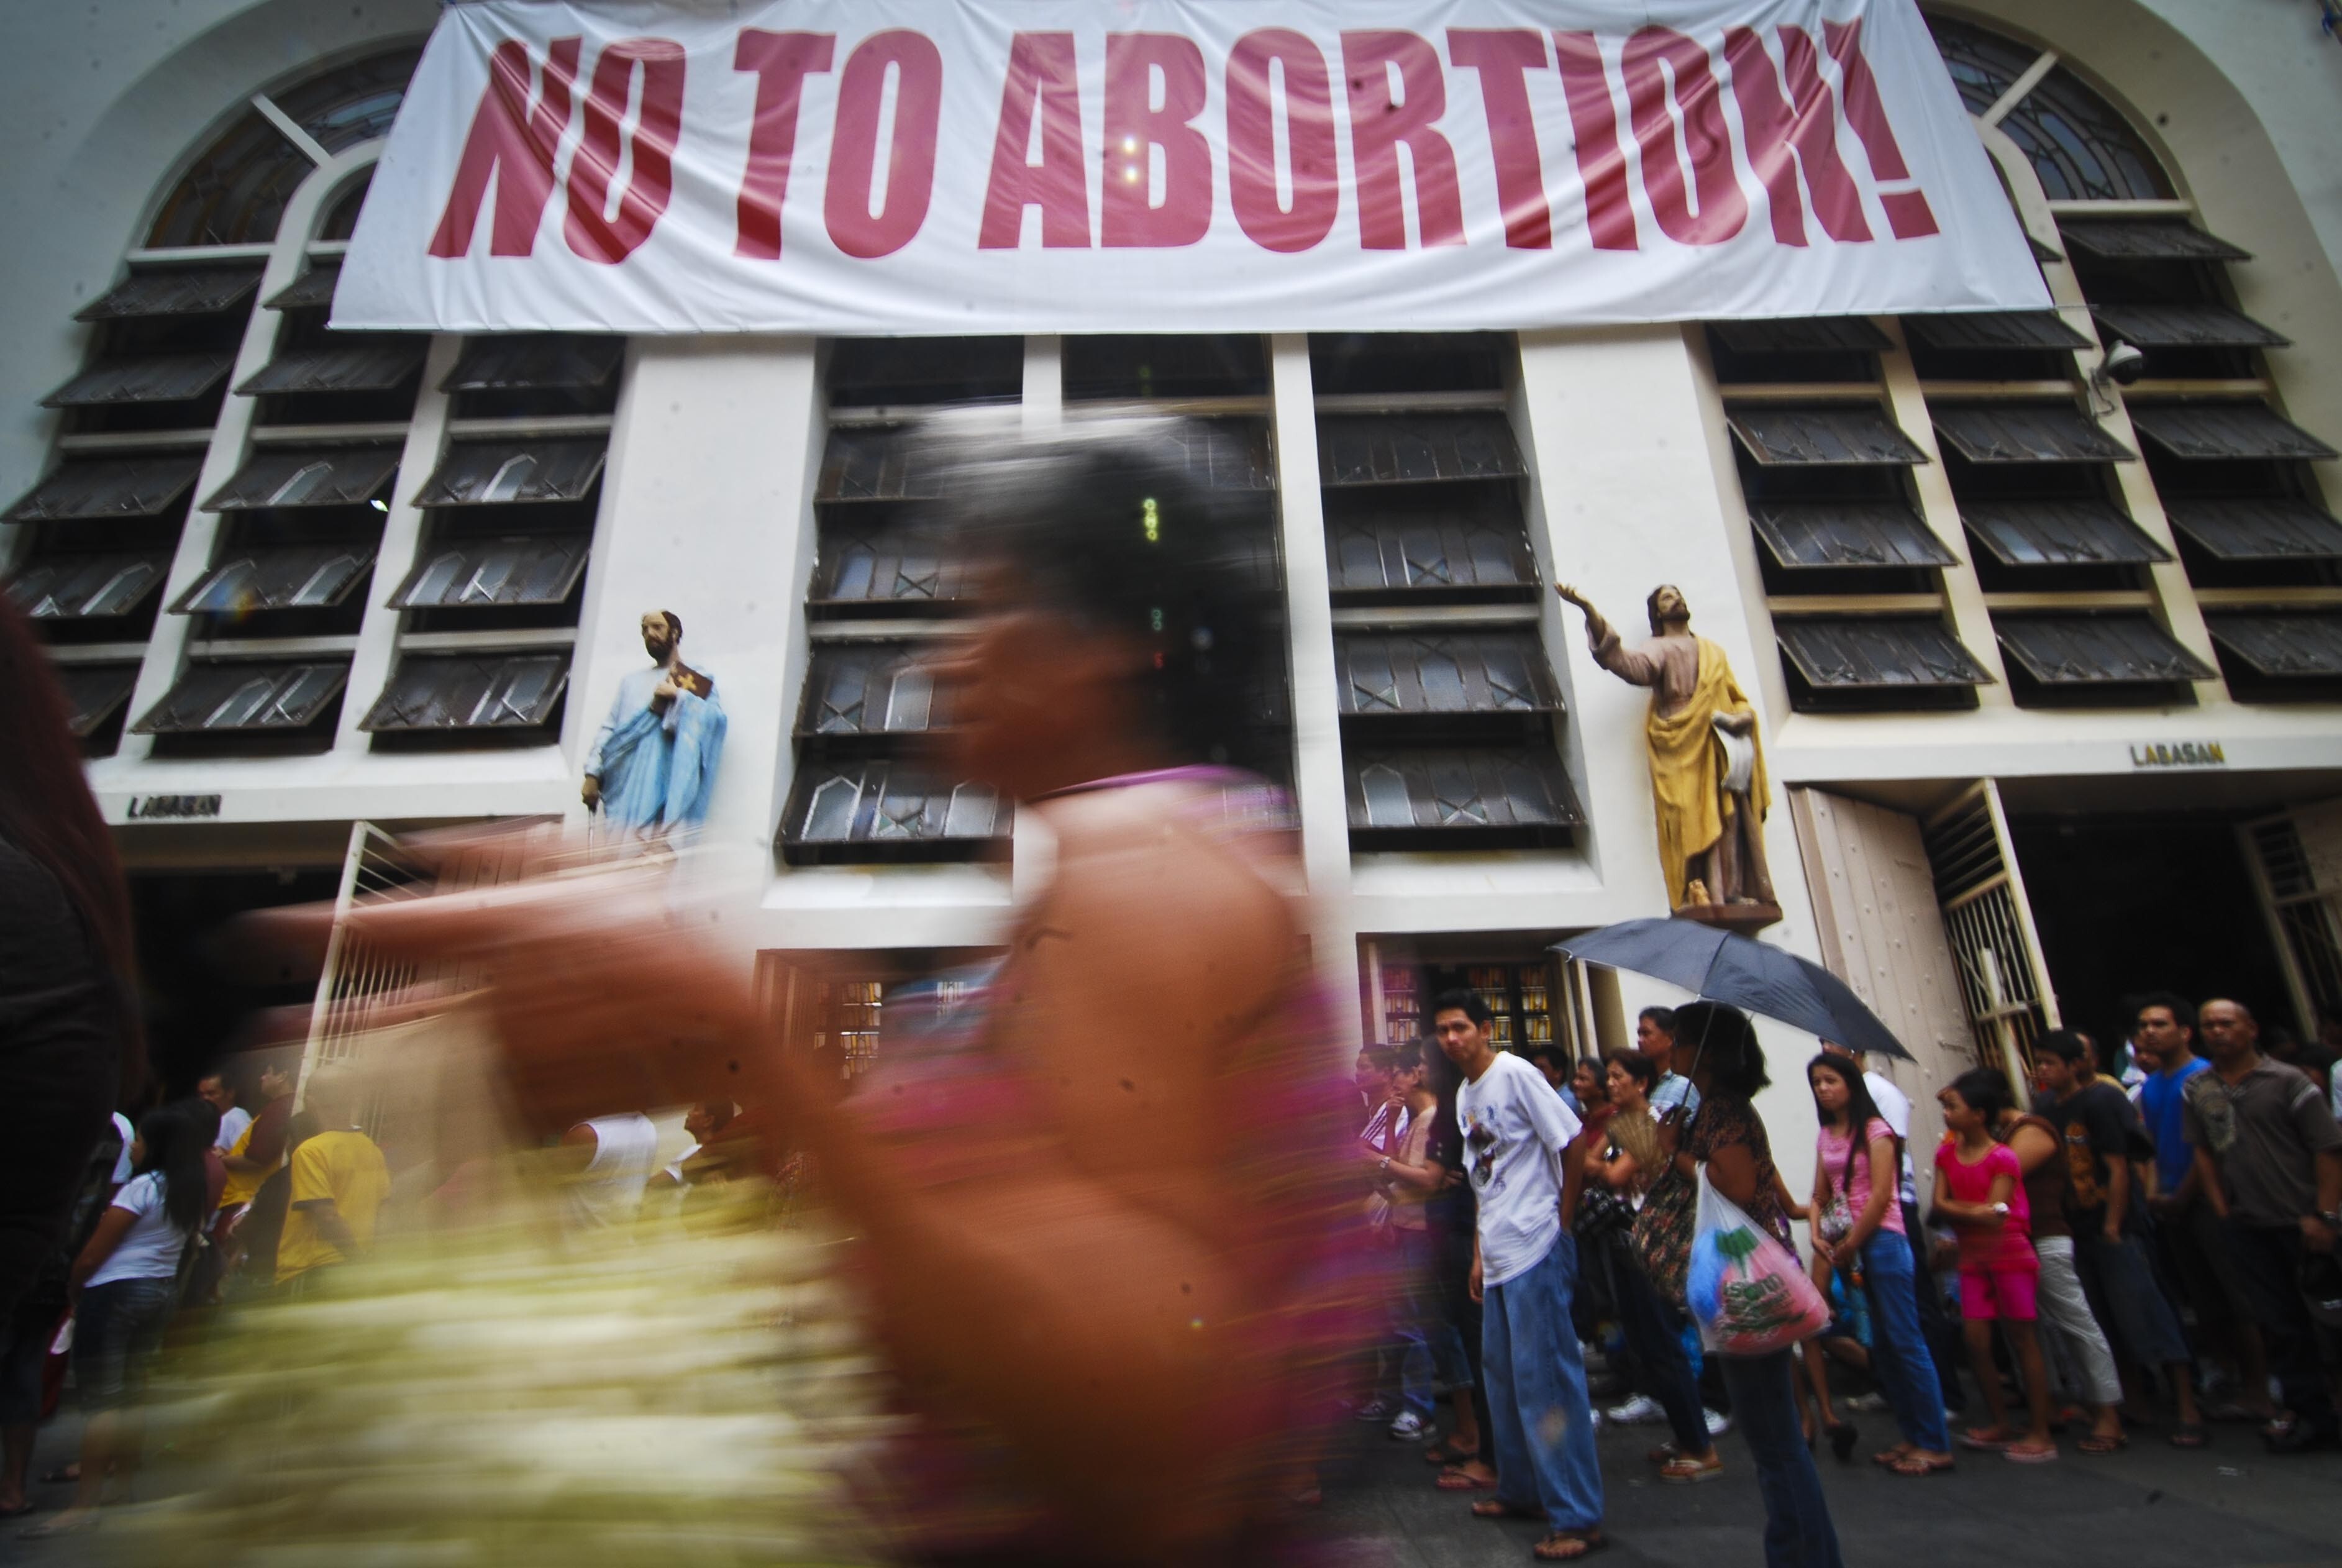 A banner is displayed in front of a church during a Catholic-organised anti-abortion rally in Manila. The author of a bill to decriminalise abortion in the Philippines says it would save lives and remove the stigma of abortion, which is common despite being illegal. Photo: Getty Images